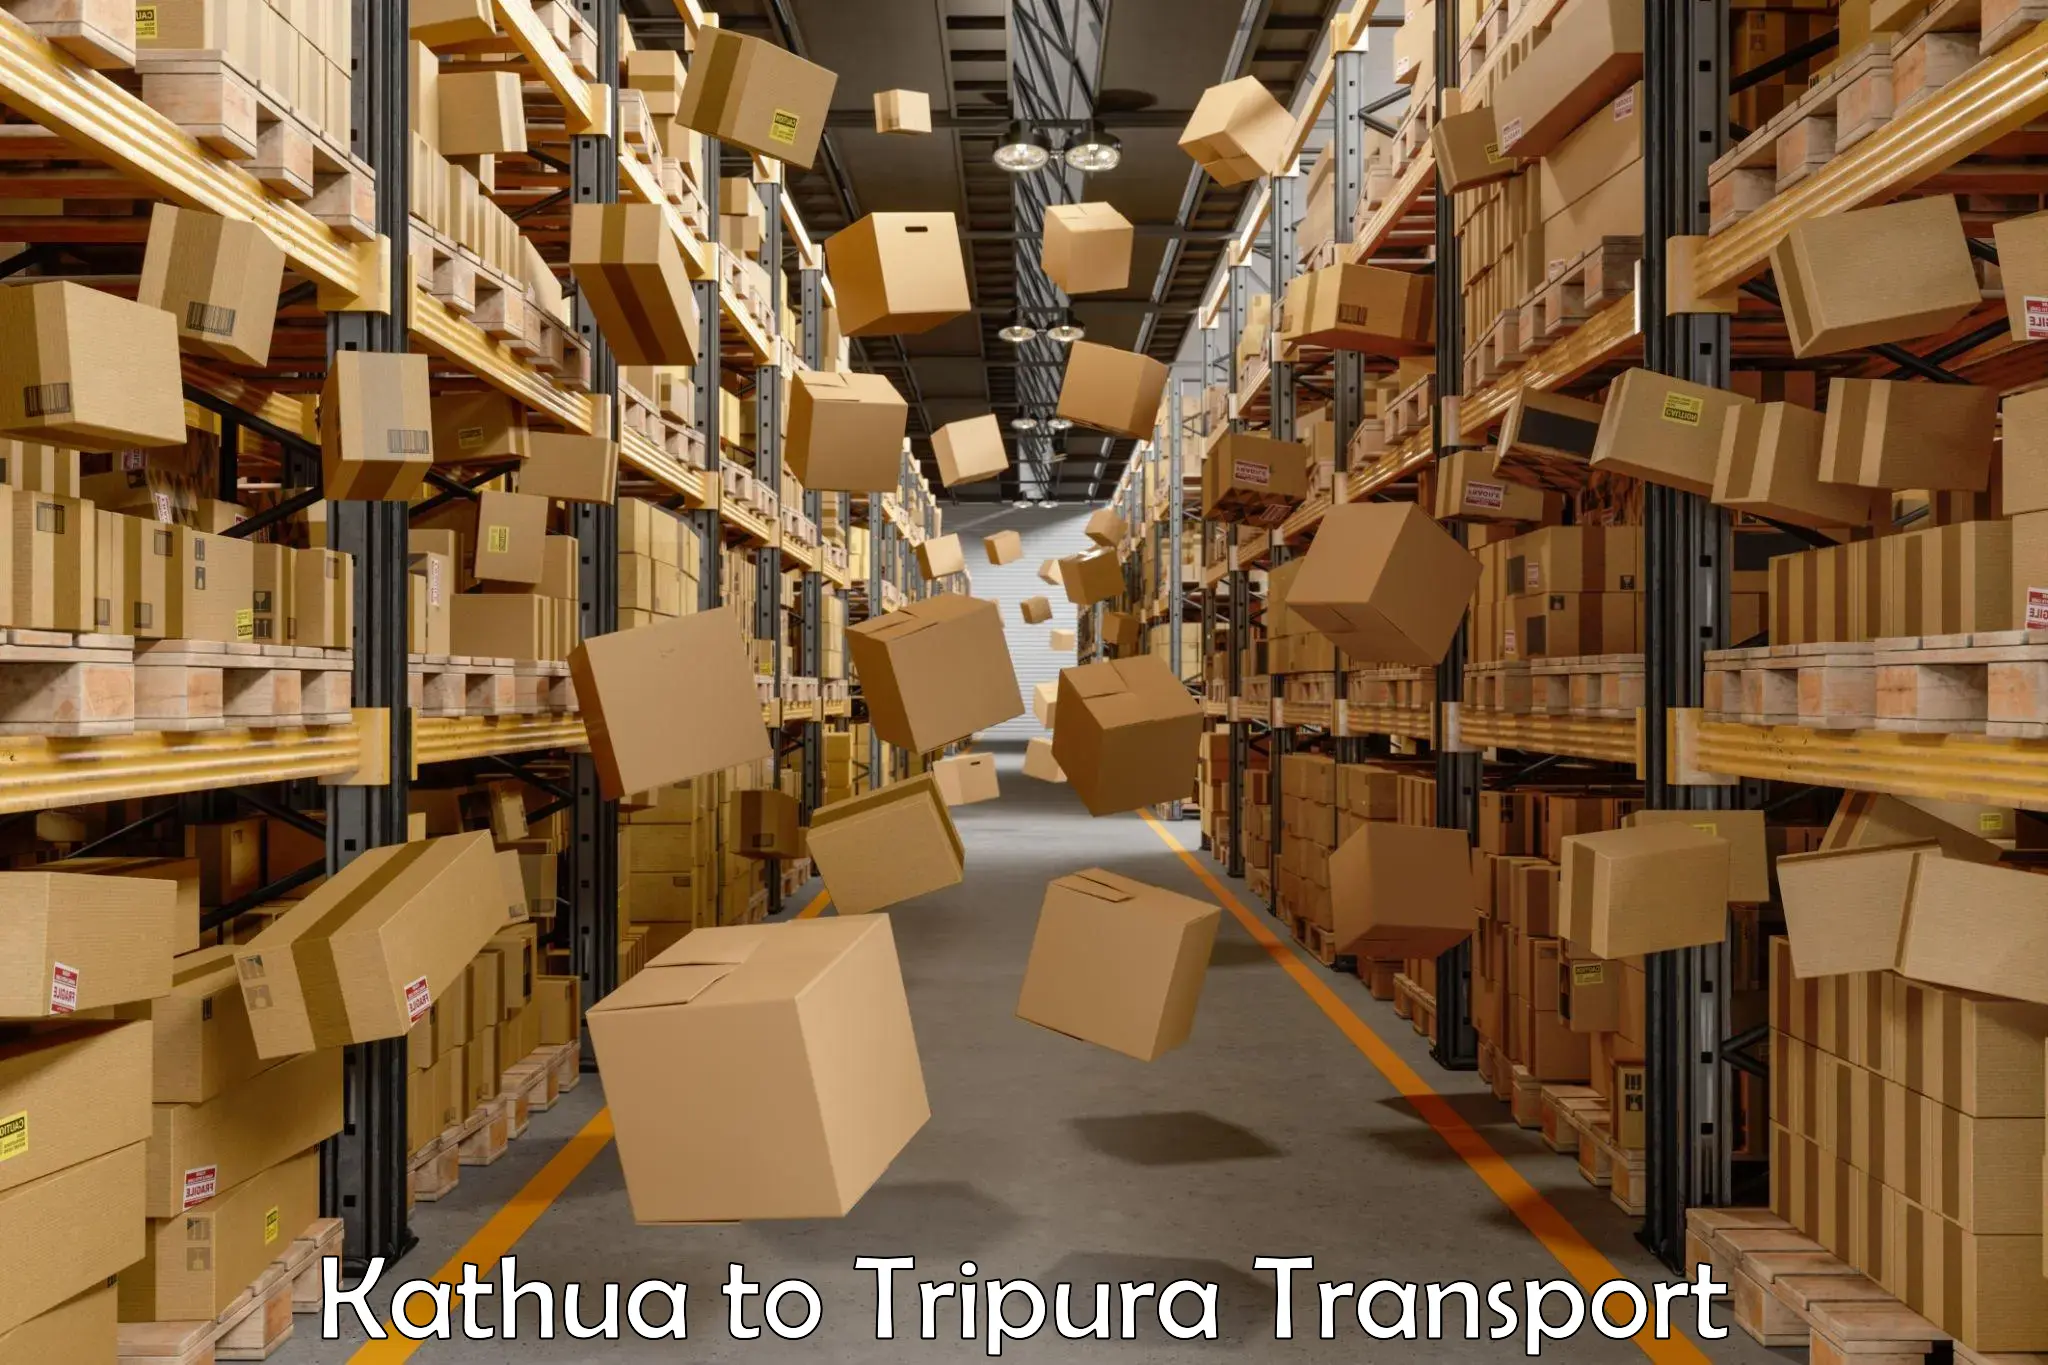 Nationwide transport services in Kathua to Udaipur Tripura